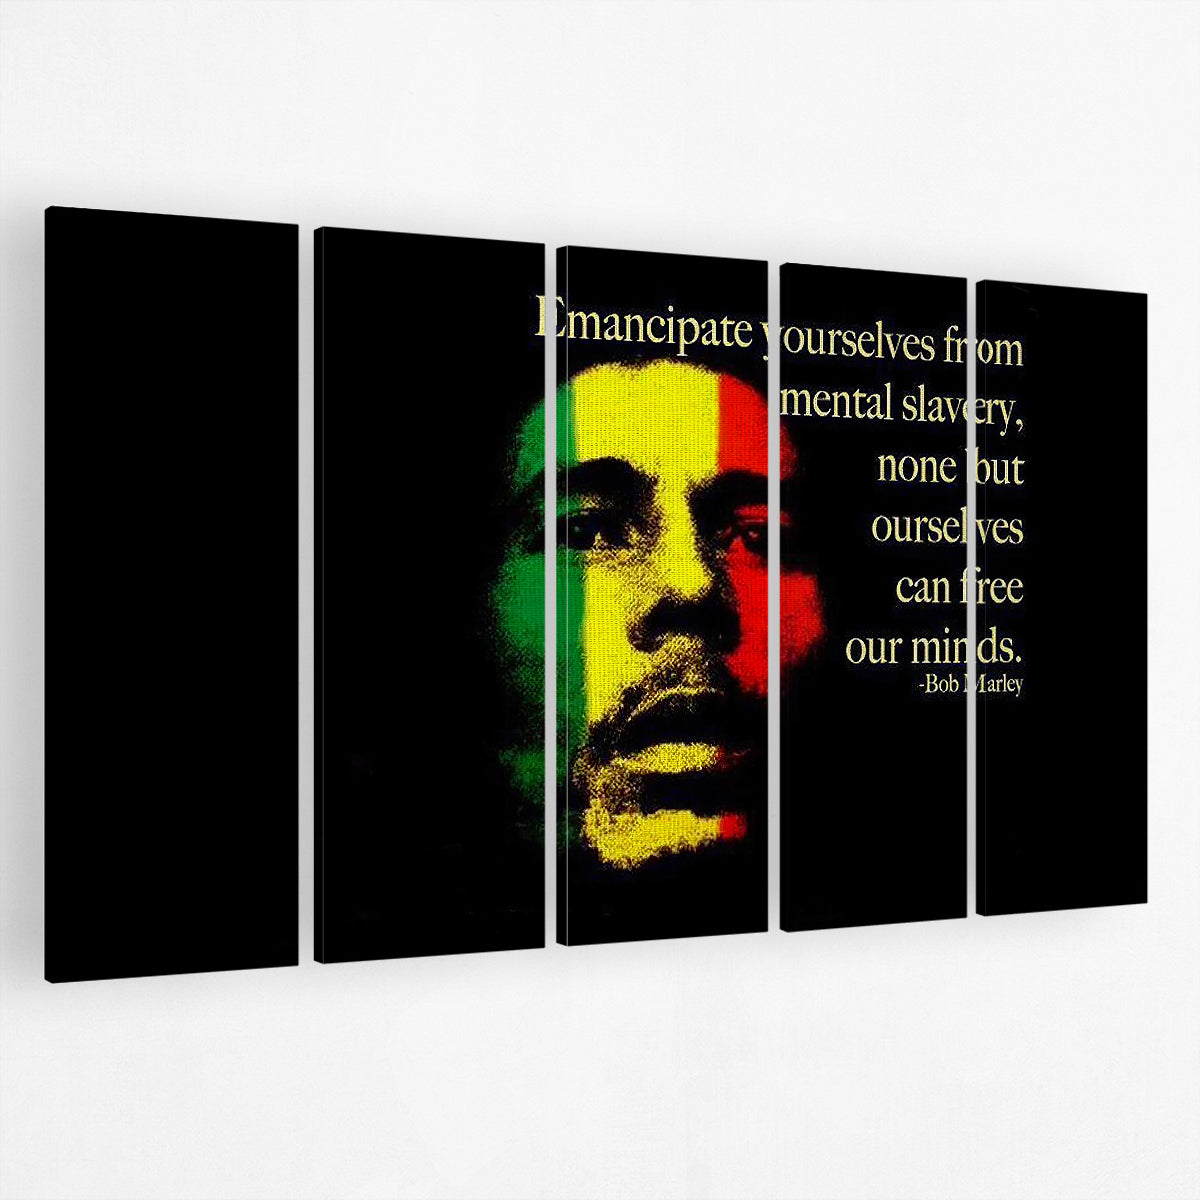 Bob Marley Quotes Wall Art Canvas 5 Piece Home Decor Prints Large Painting Set 